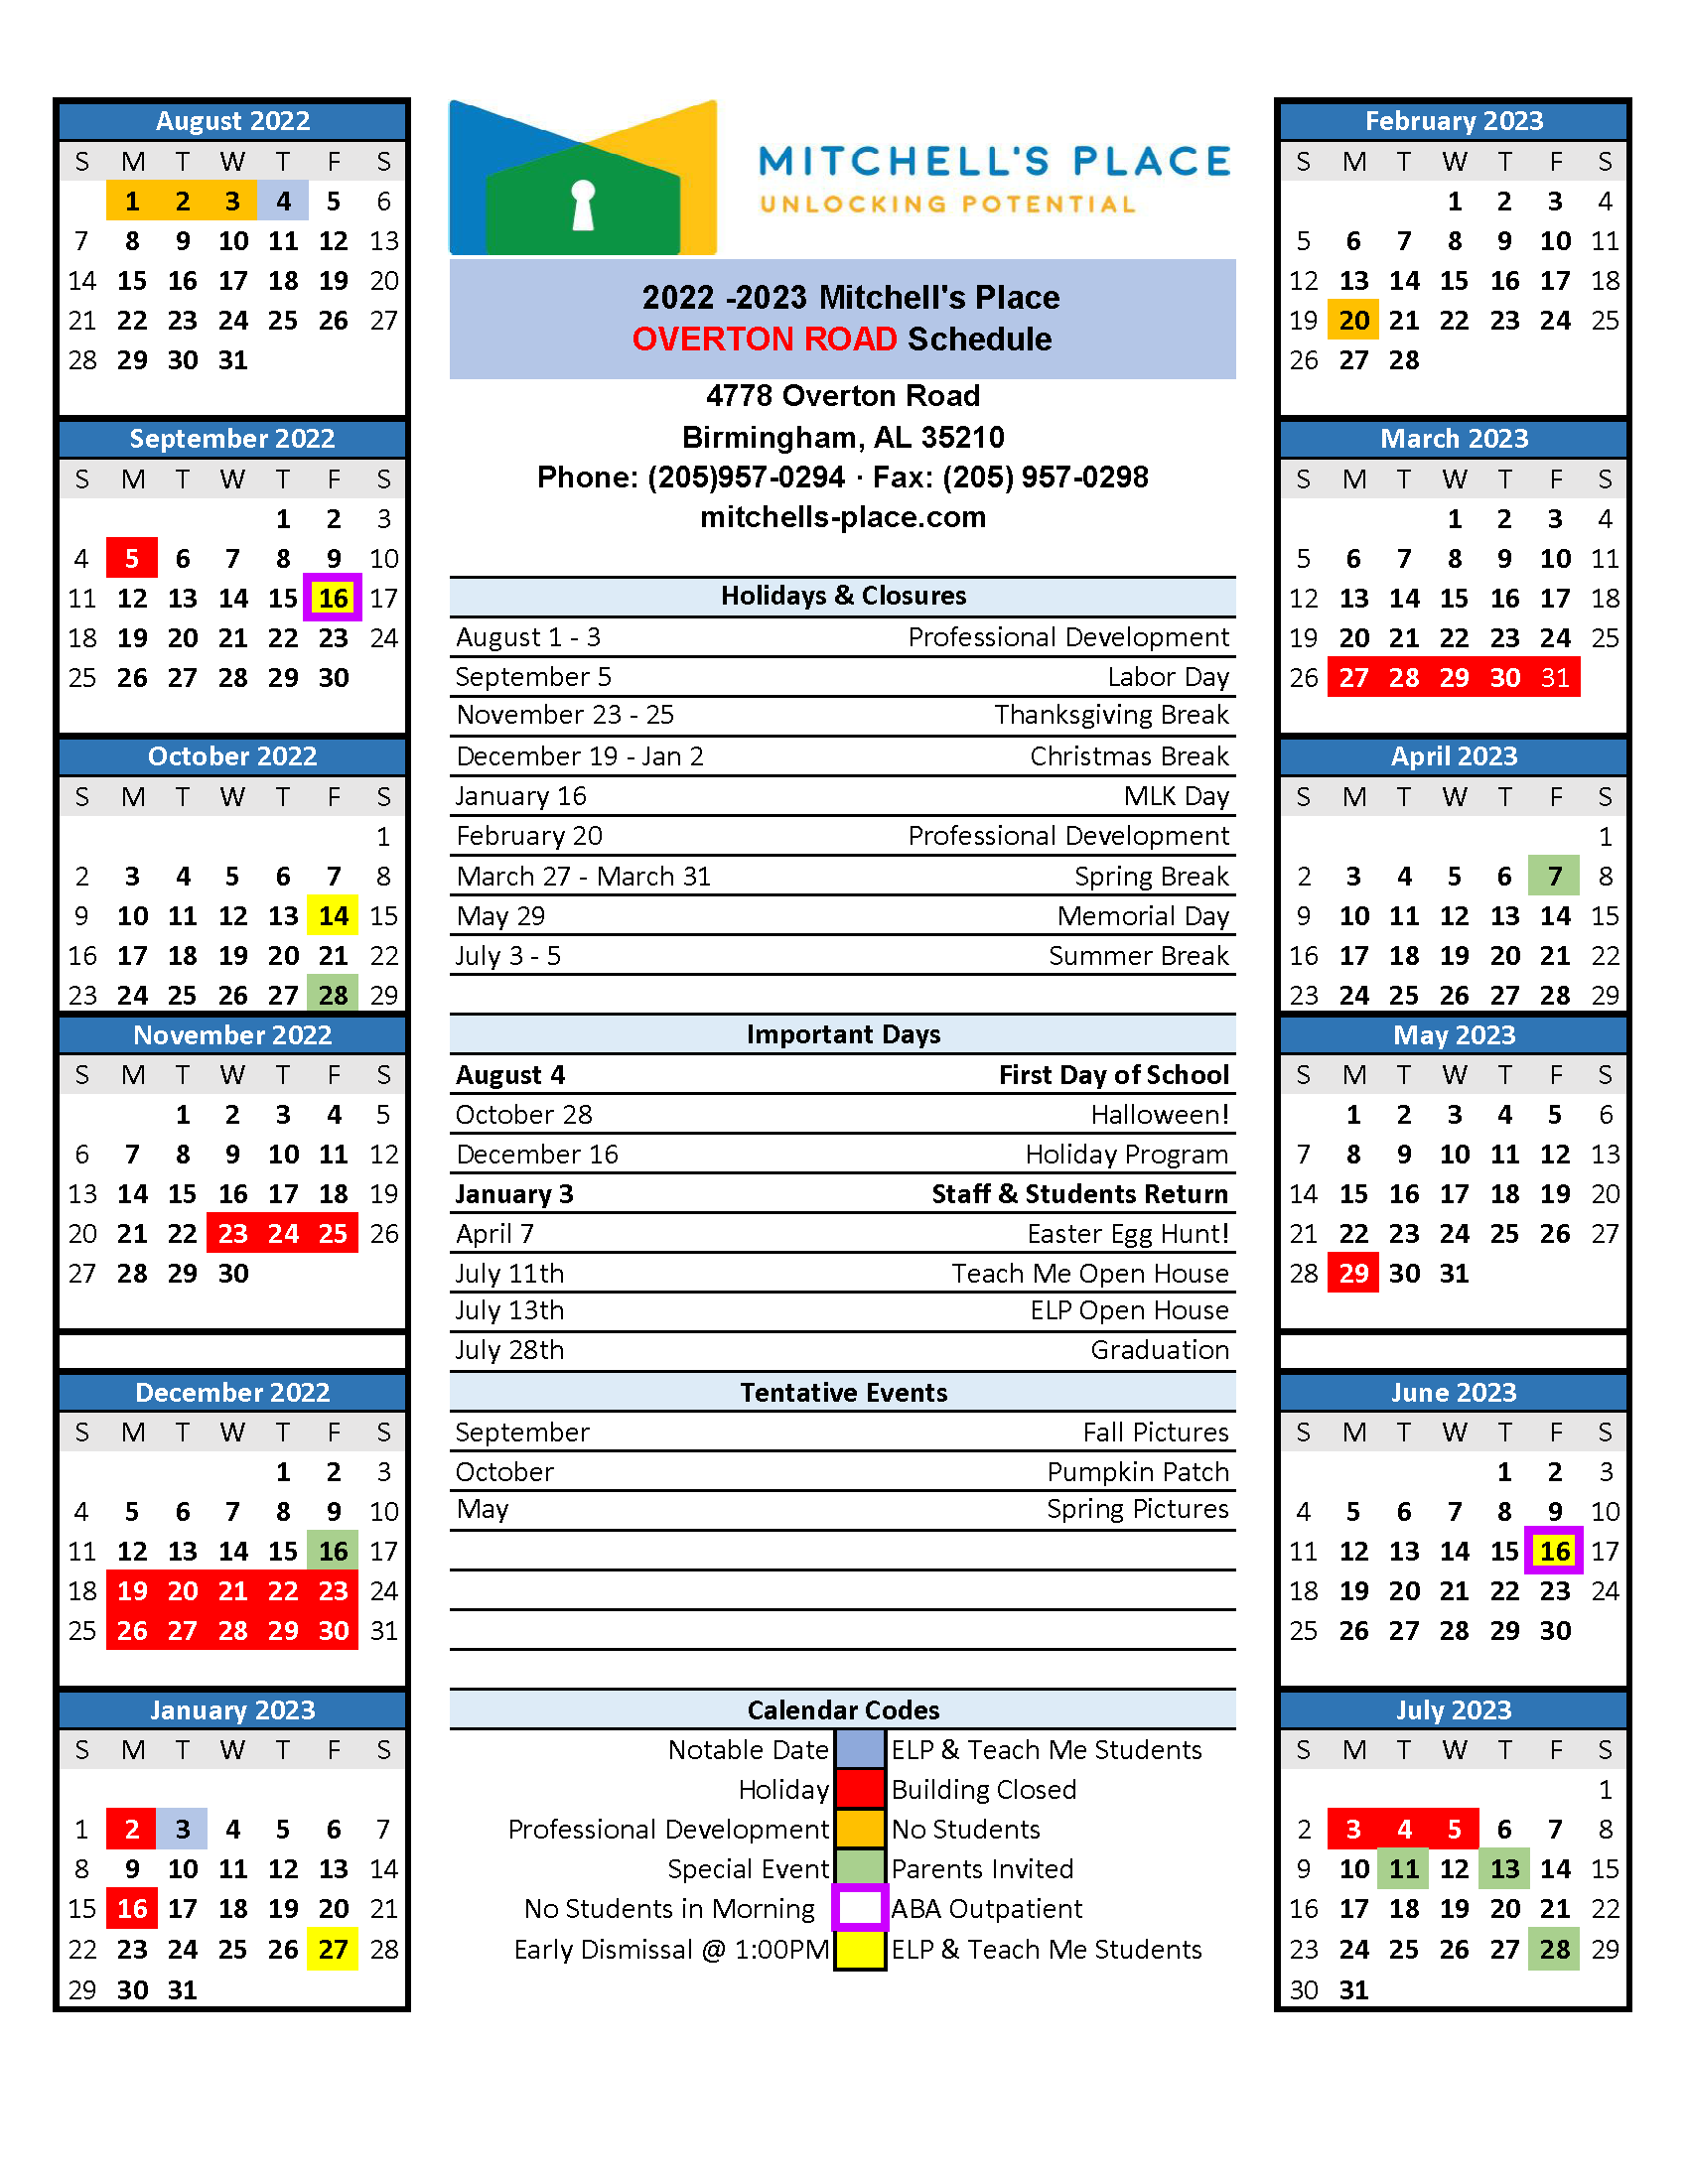 MP Schedules - Mitchell's Place